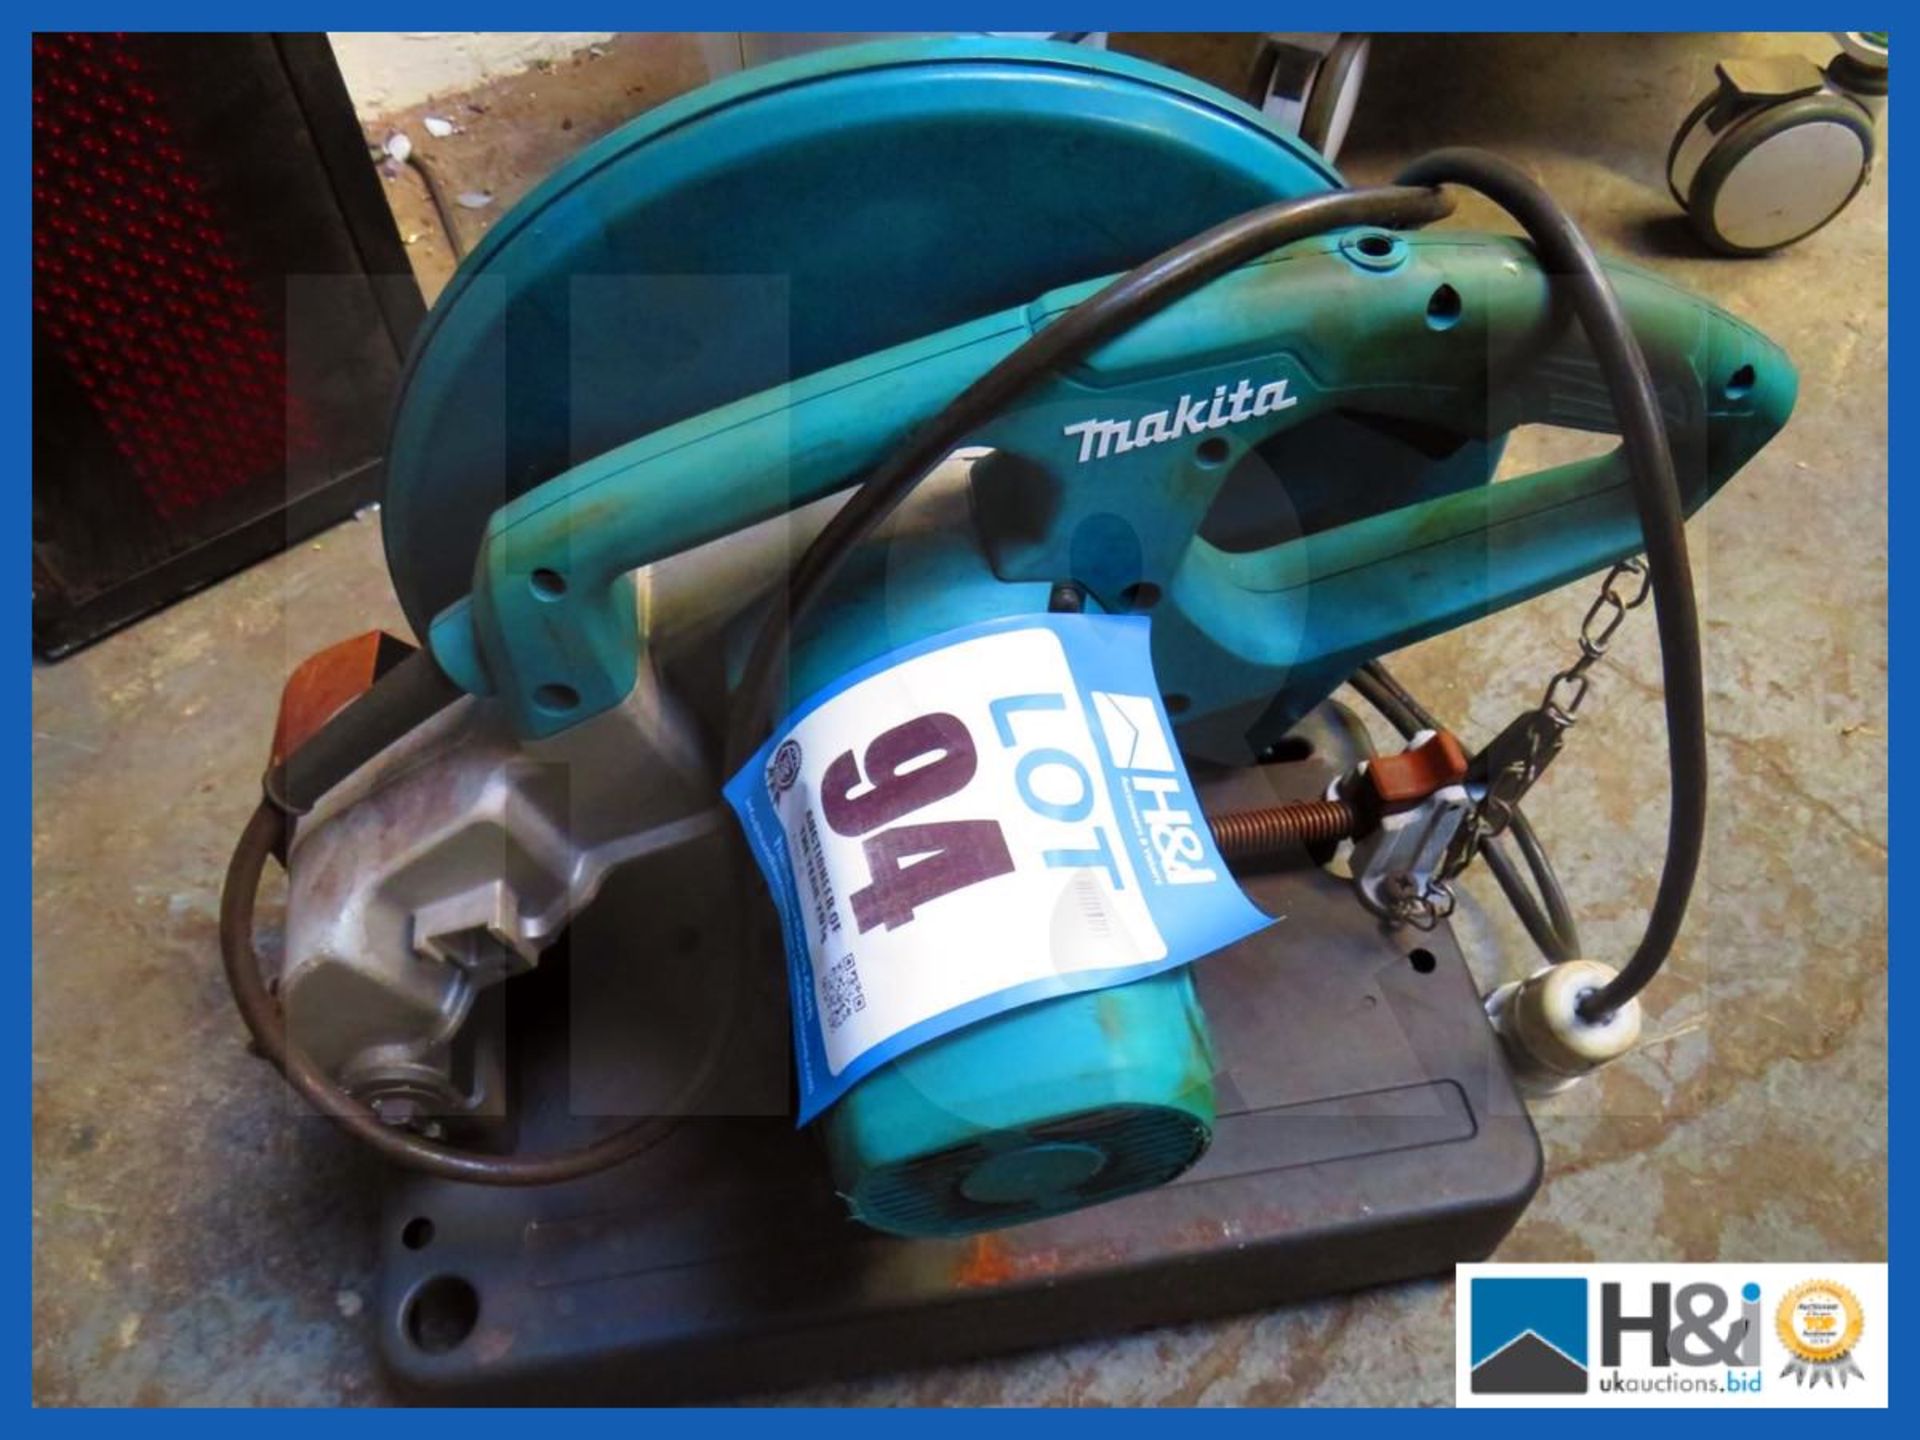 MAKITA SAWIf you'd like to sign-up to receive relevant updates about our auctions, please visit